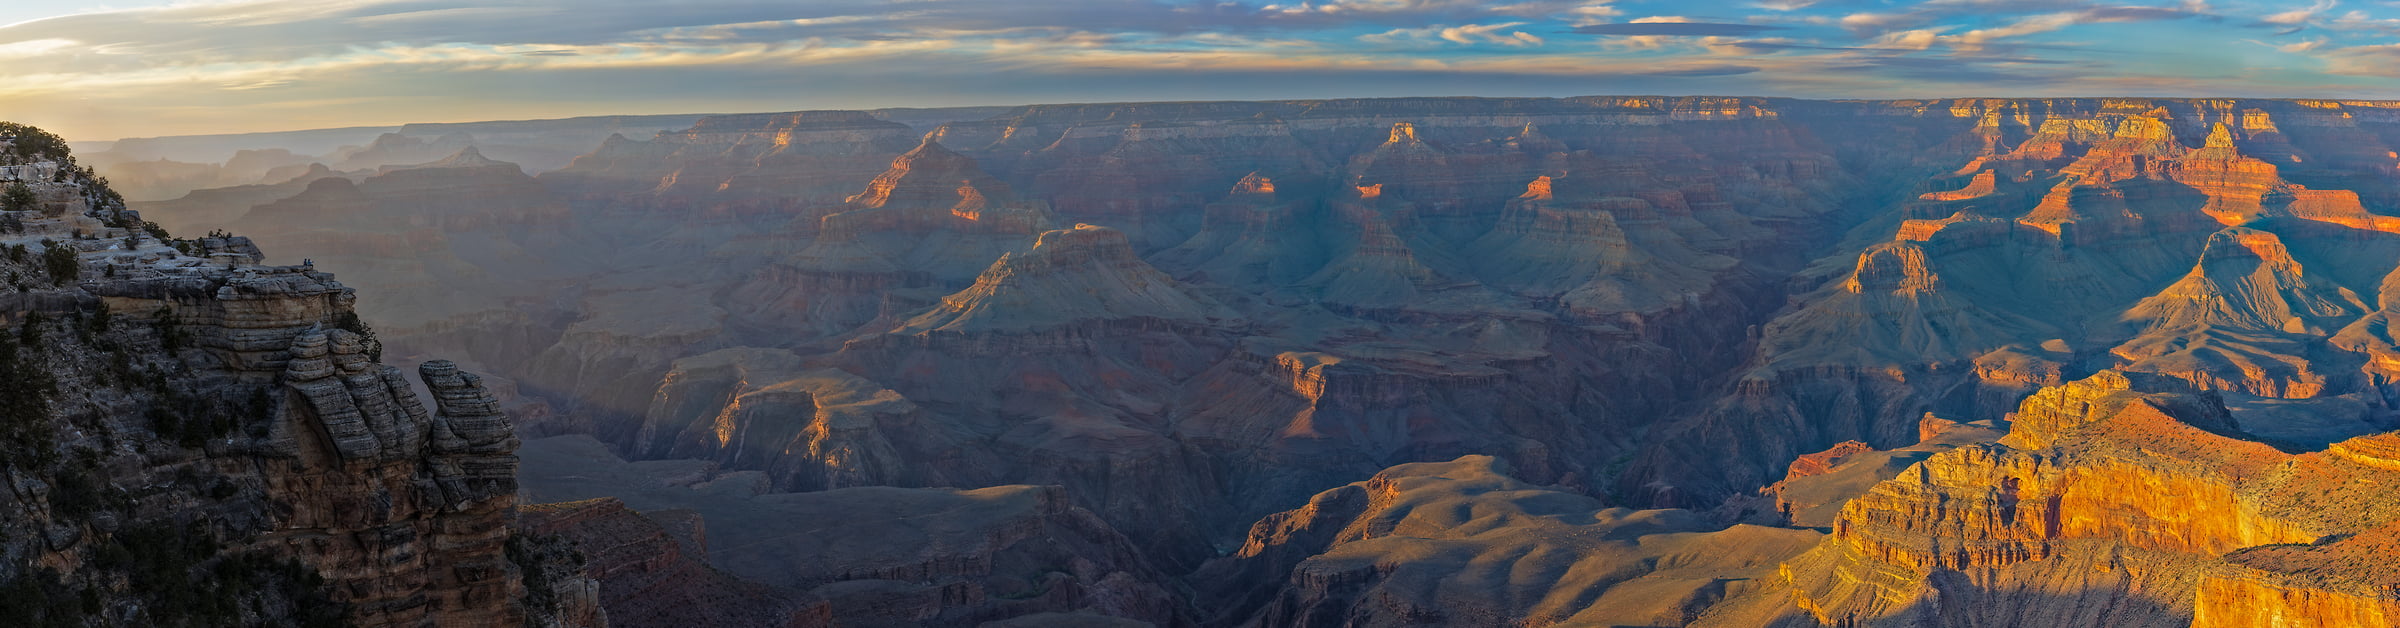 4,299 megapixels! A very high resolution, large-format VAST photo print of the Grand Canyon at sunset; photograph created by John Freeman in Mather Point, South Rim, Grand Canyon, Arizona